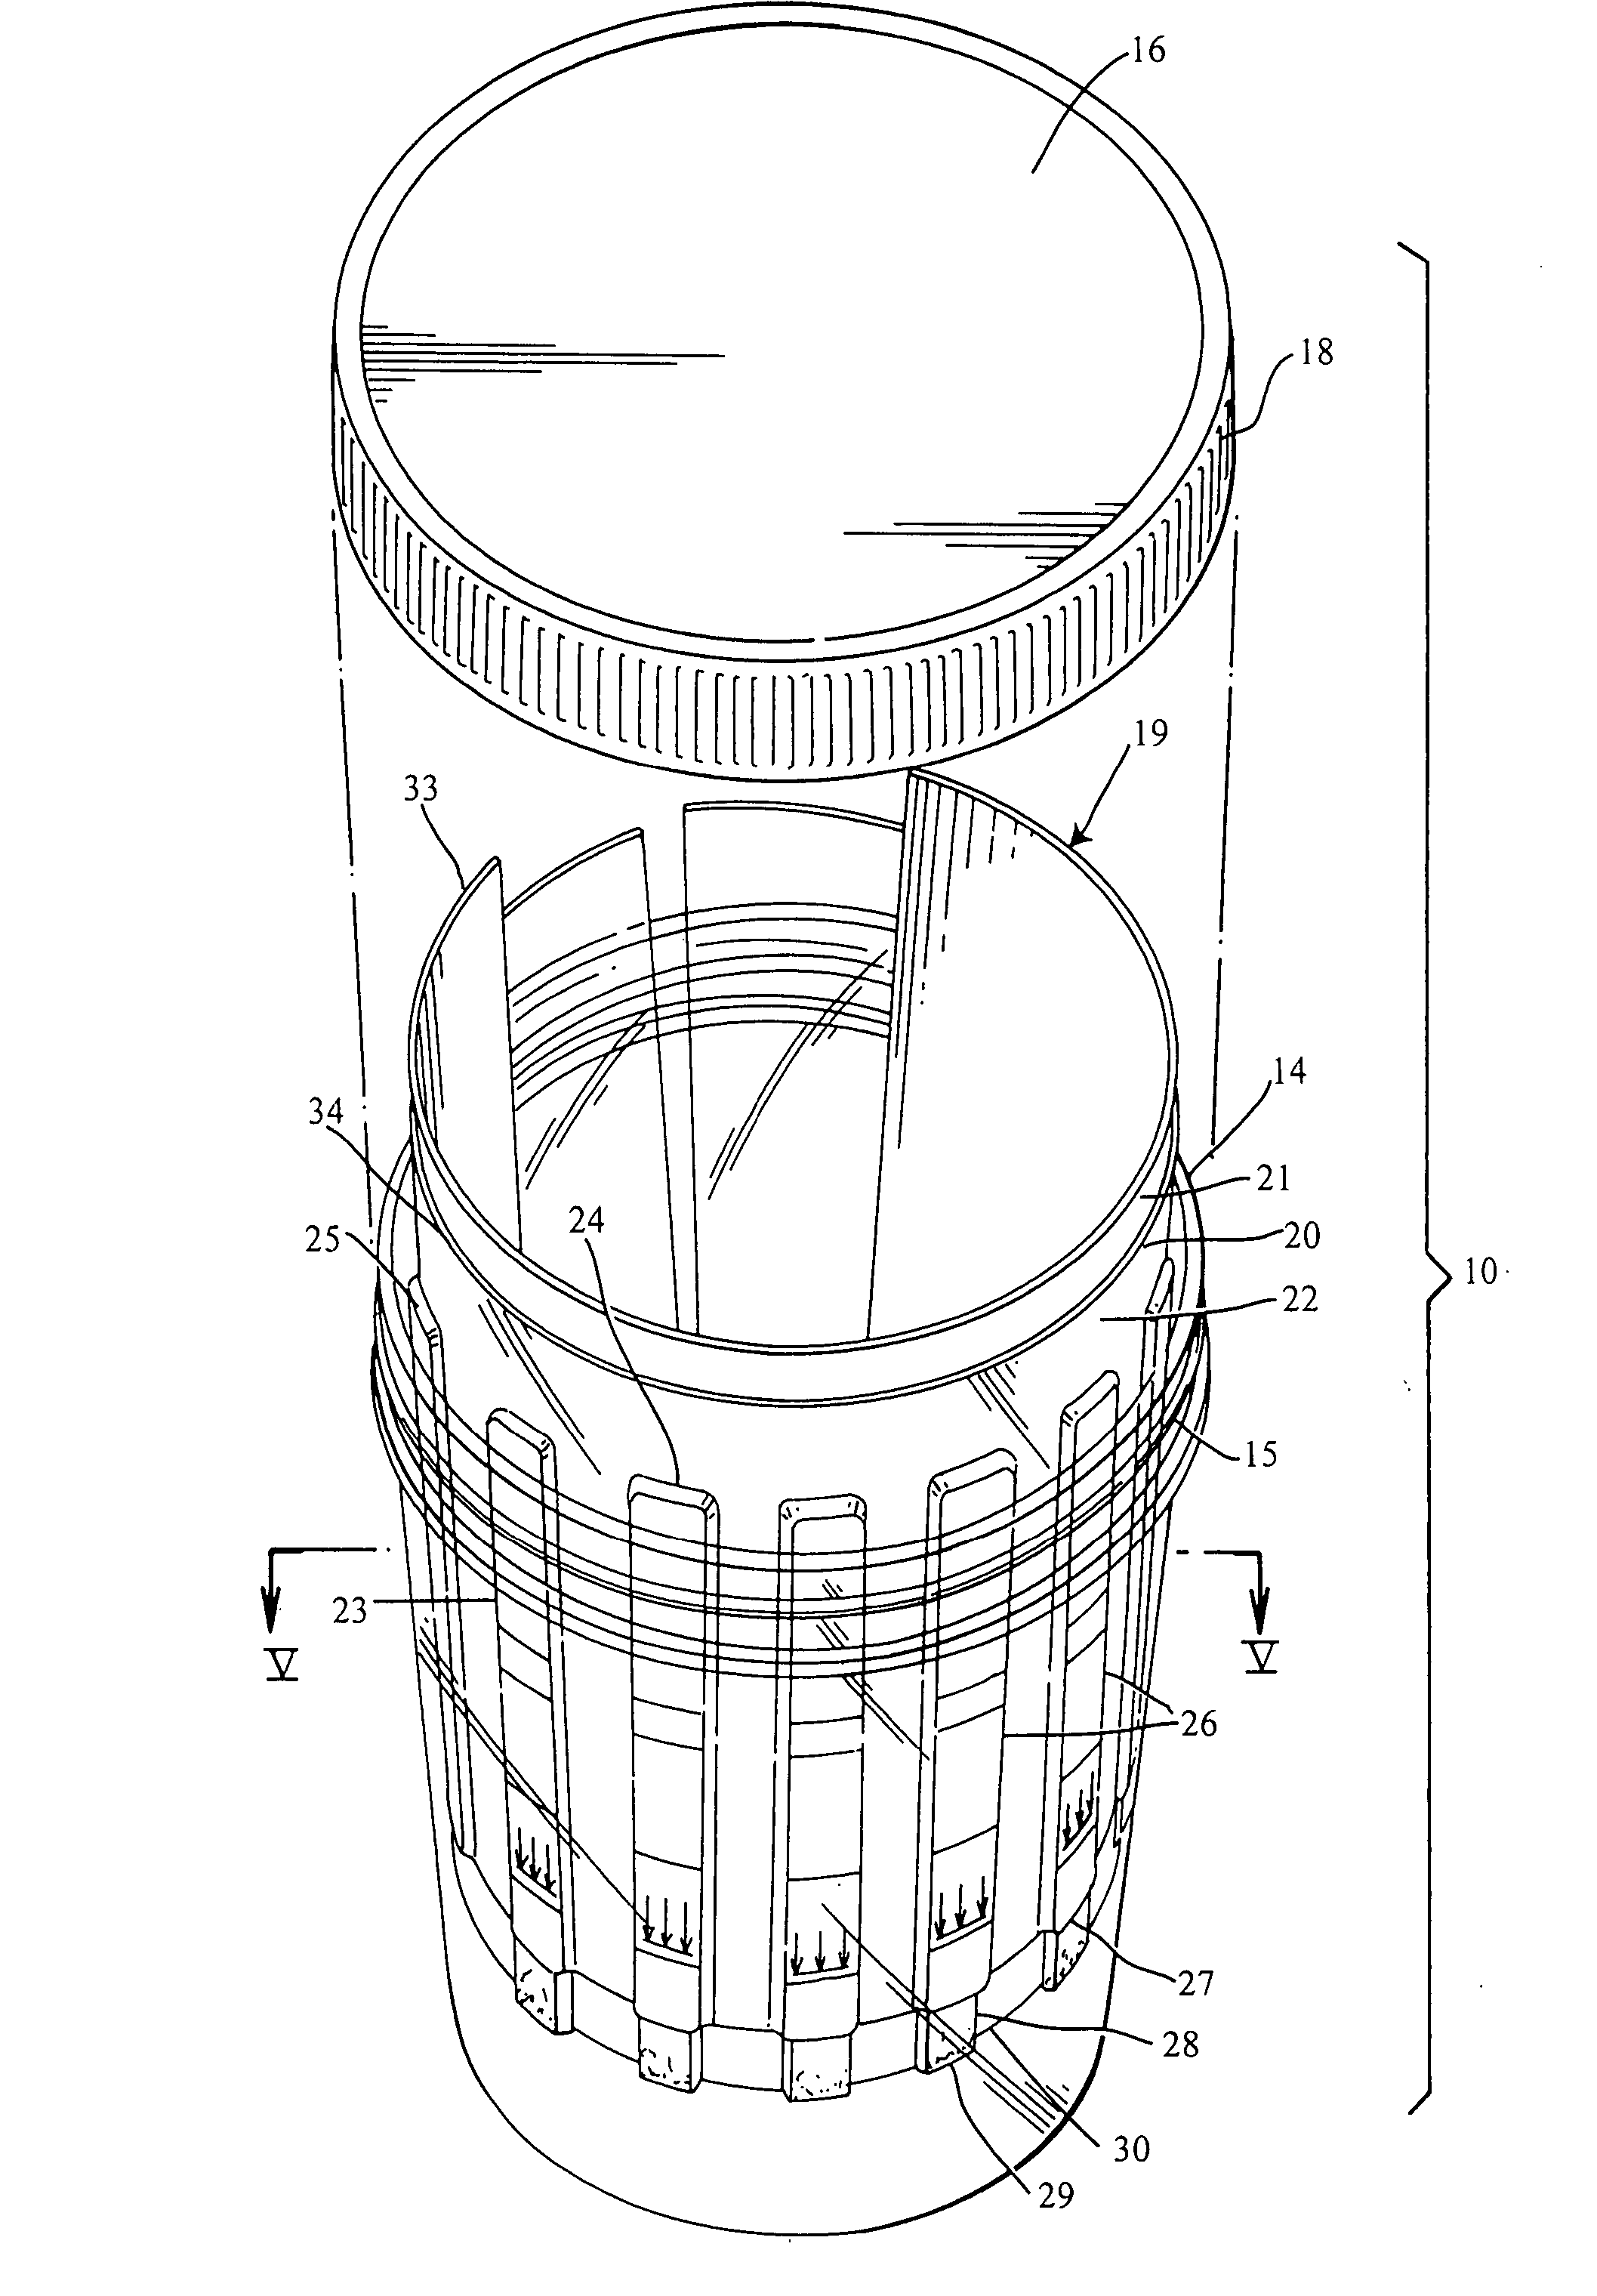 Assay device and process for the testing of fluid samples